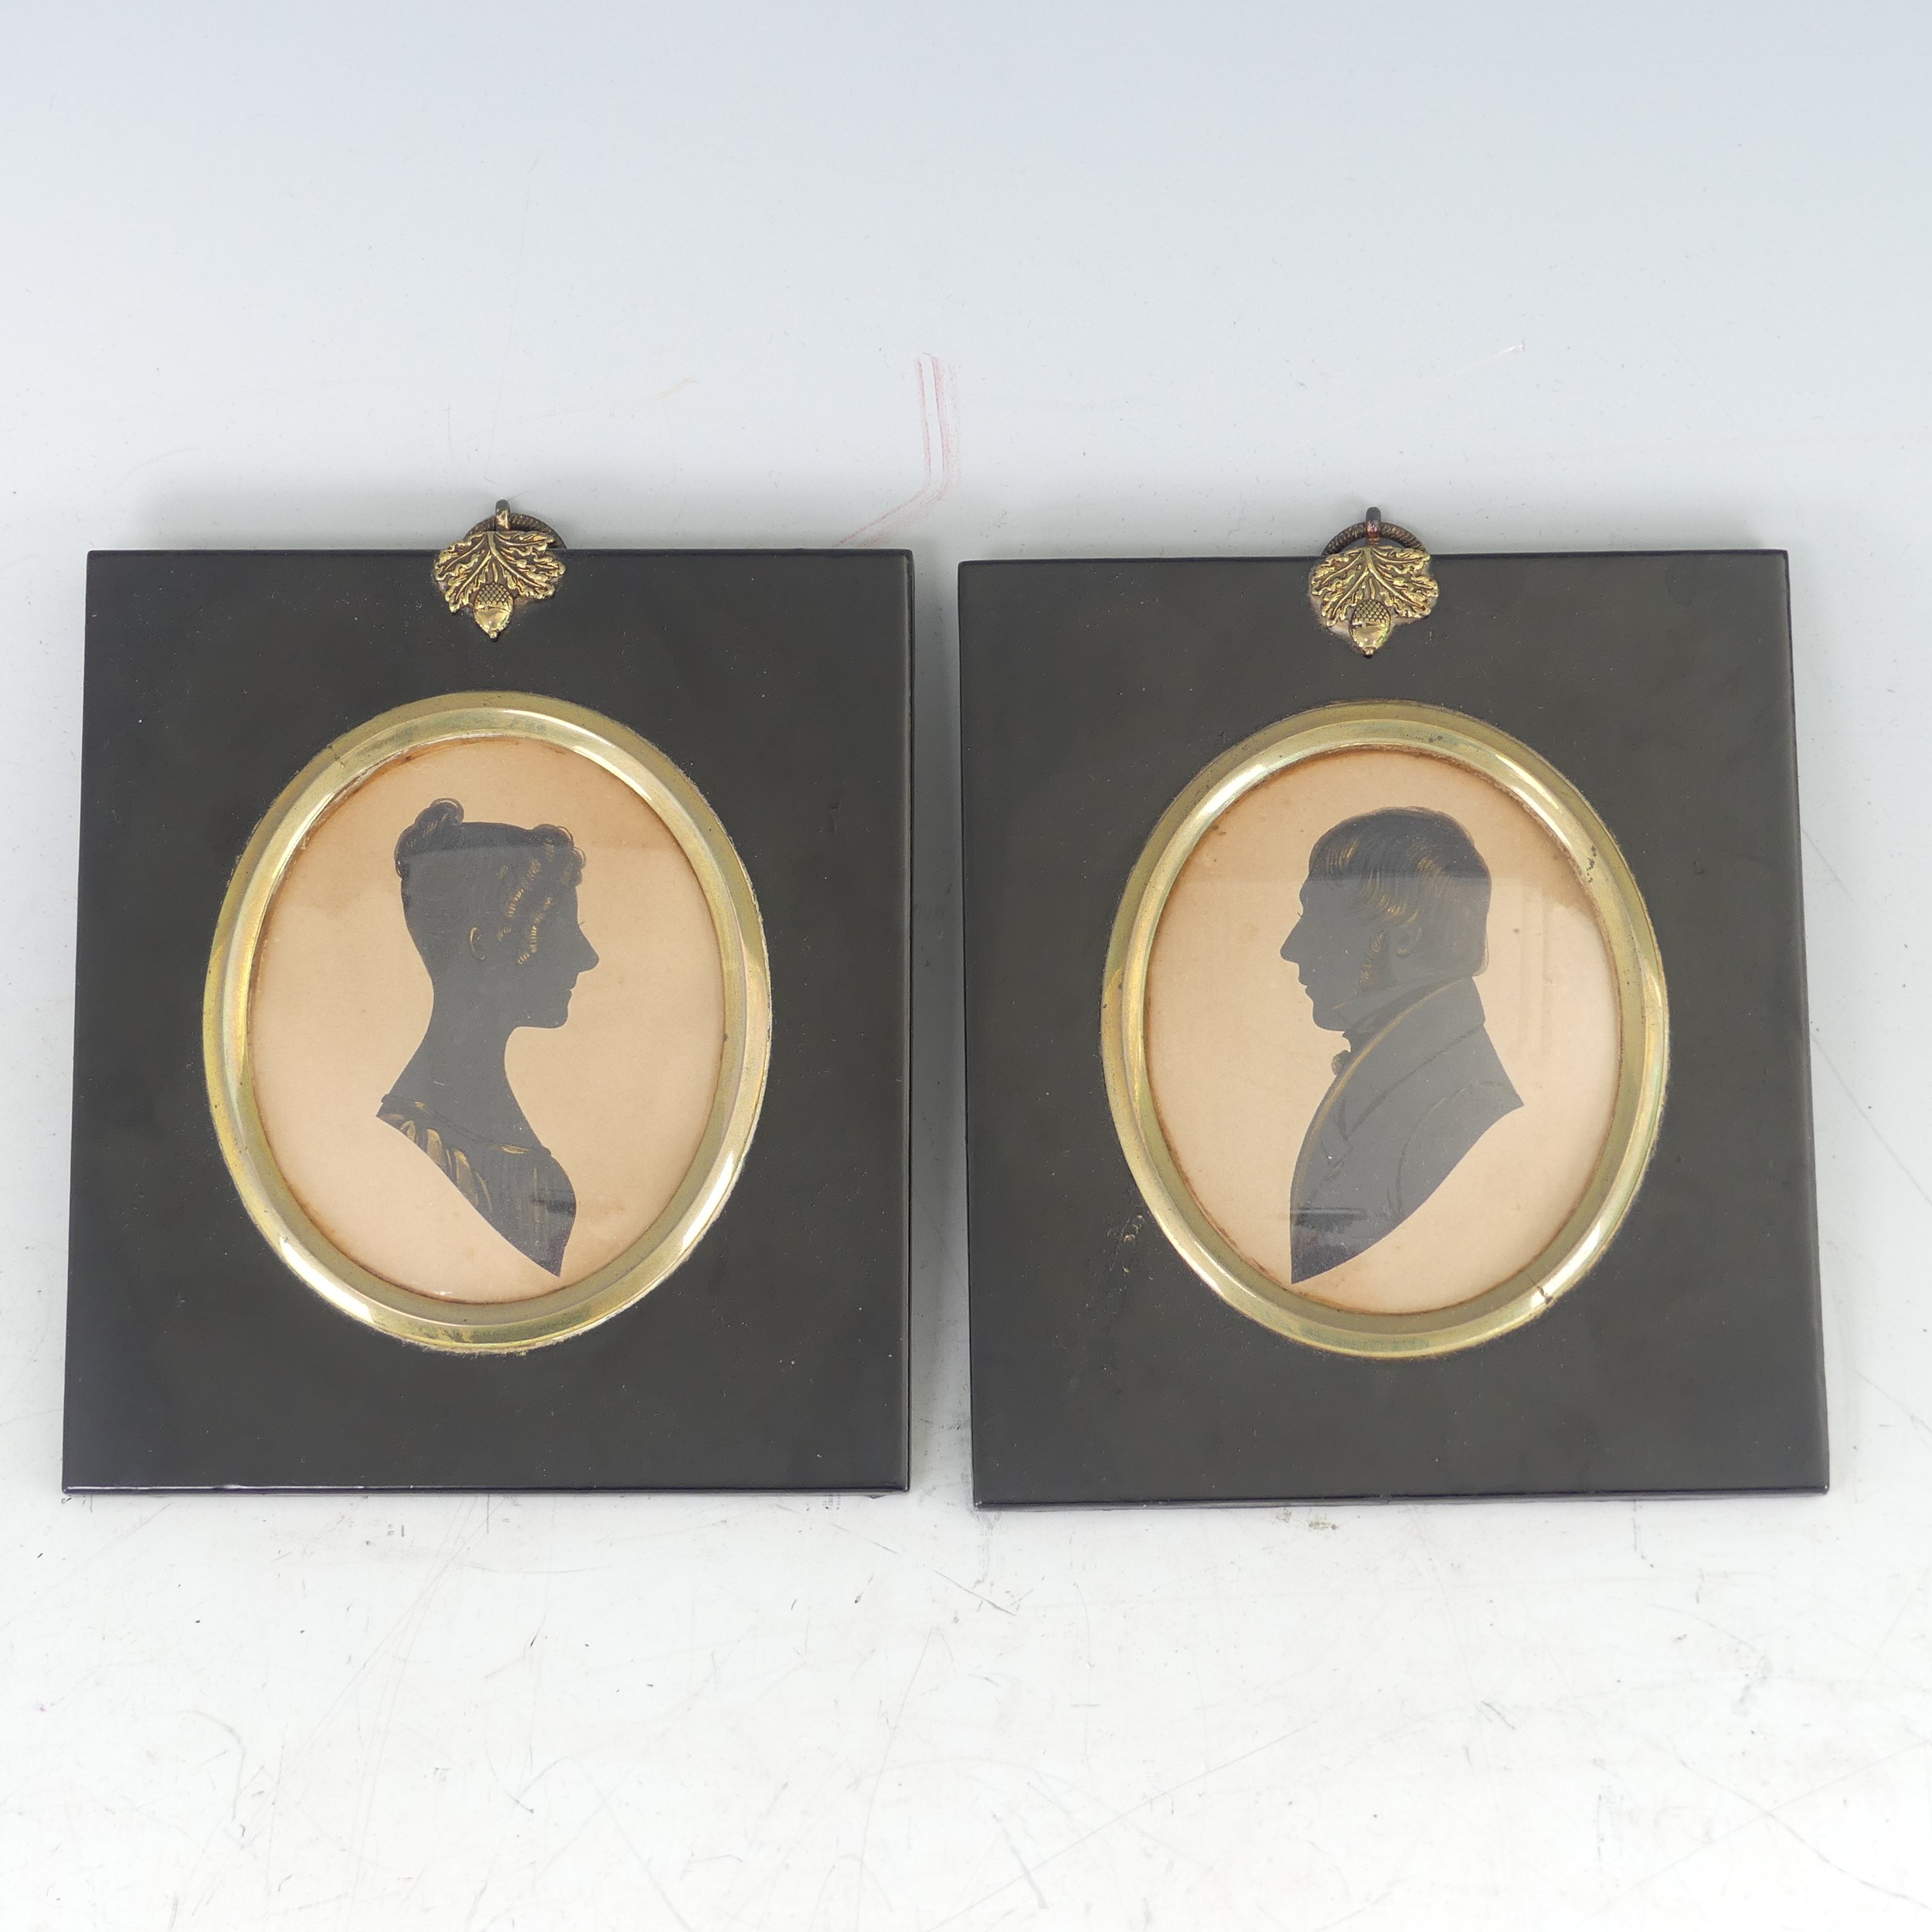 Pair of Victorian silhouette portraits, 'Thomas Oldham' and 'Mary Ann Oldham', painted on card,